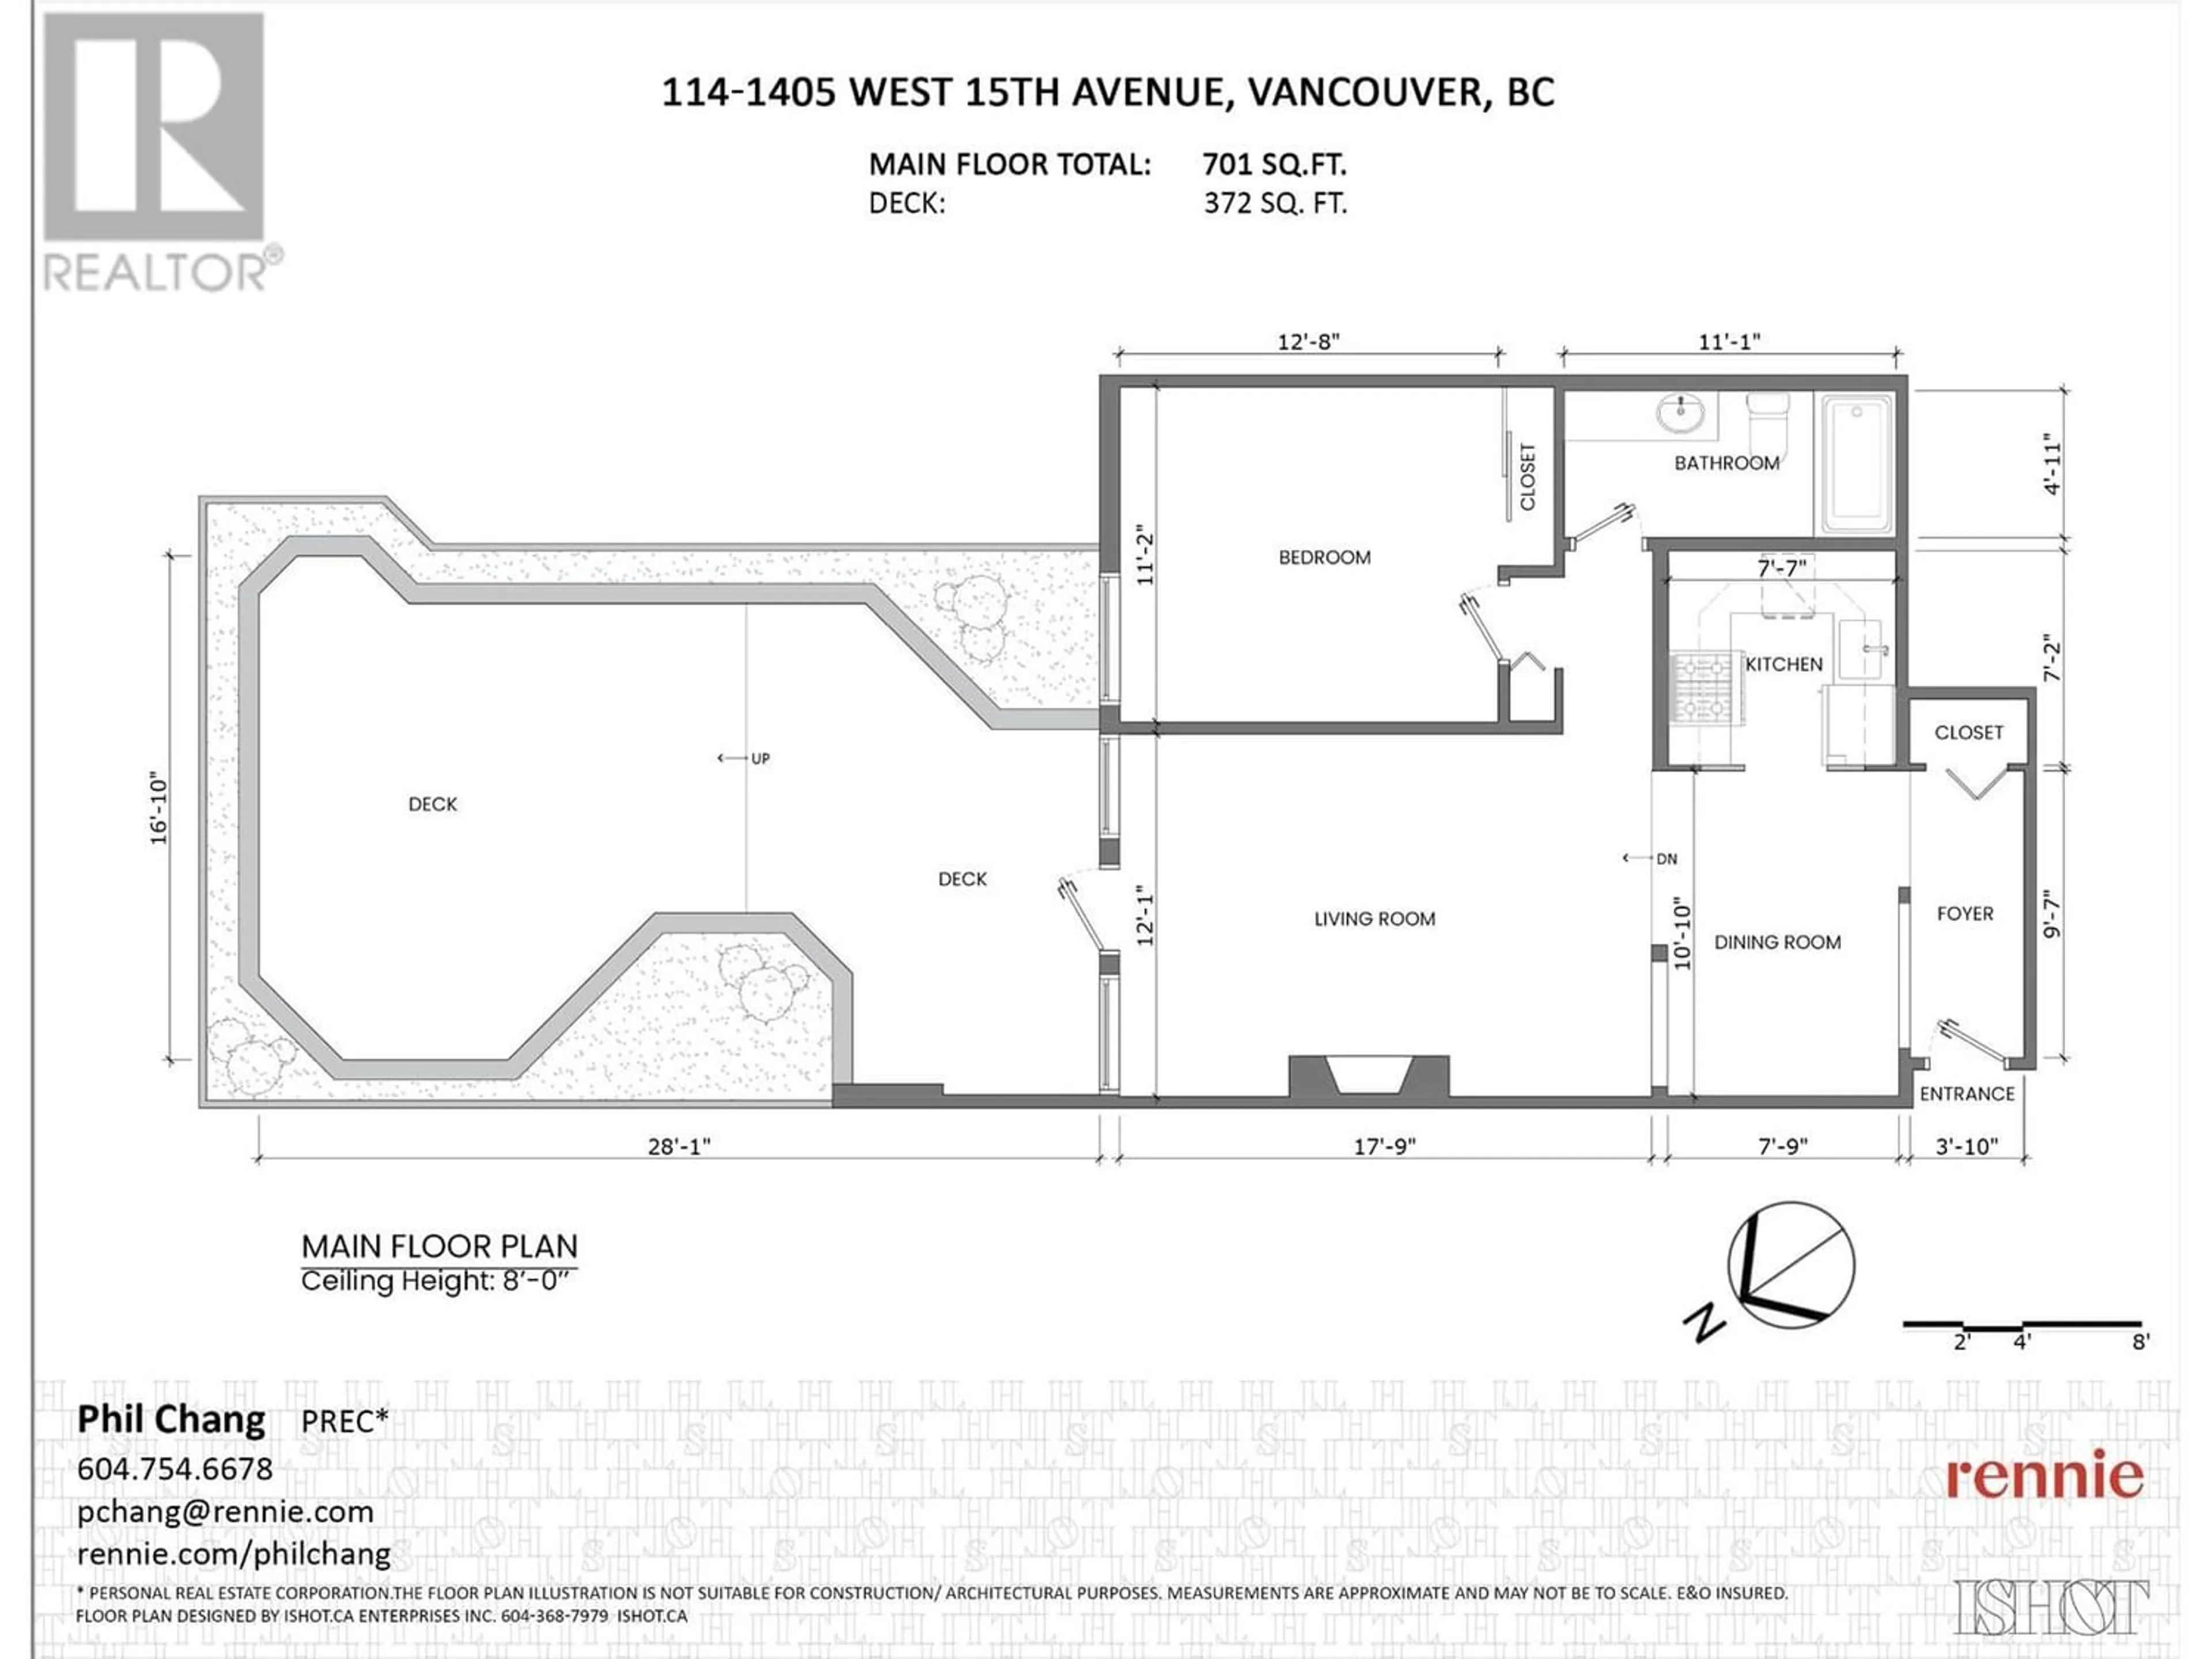 Floor plan for 114 1405 W 15TH AVENUE, Vancouver British Columbia V6H3R2